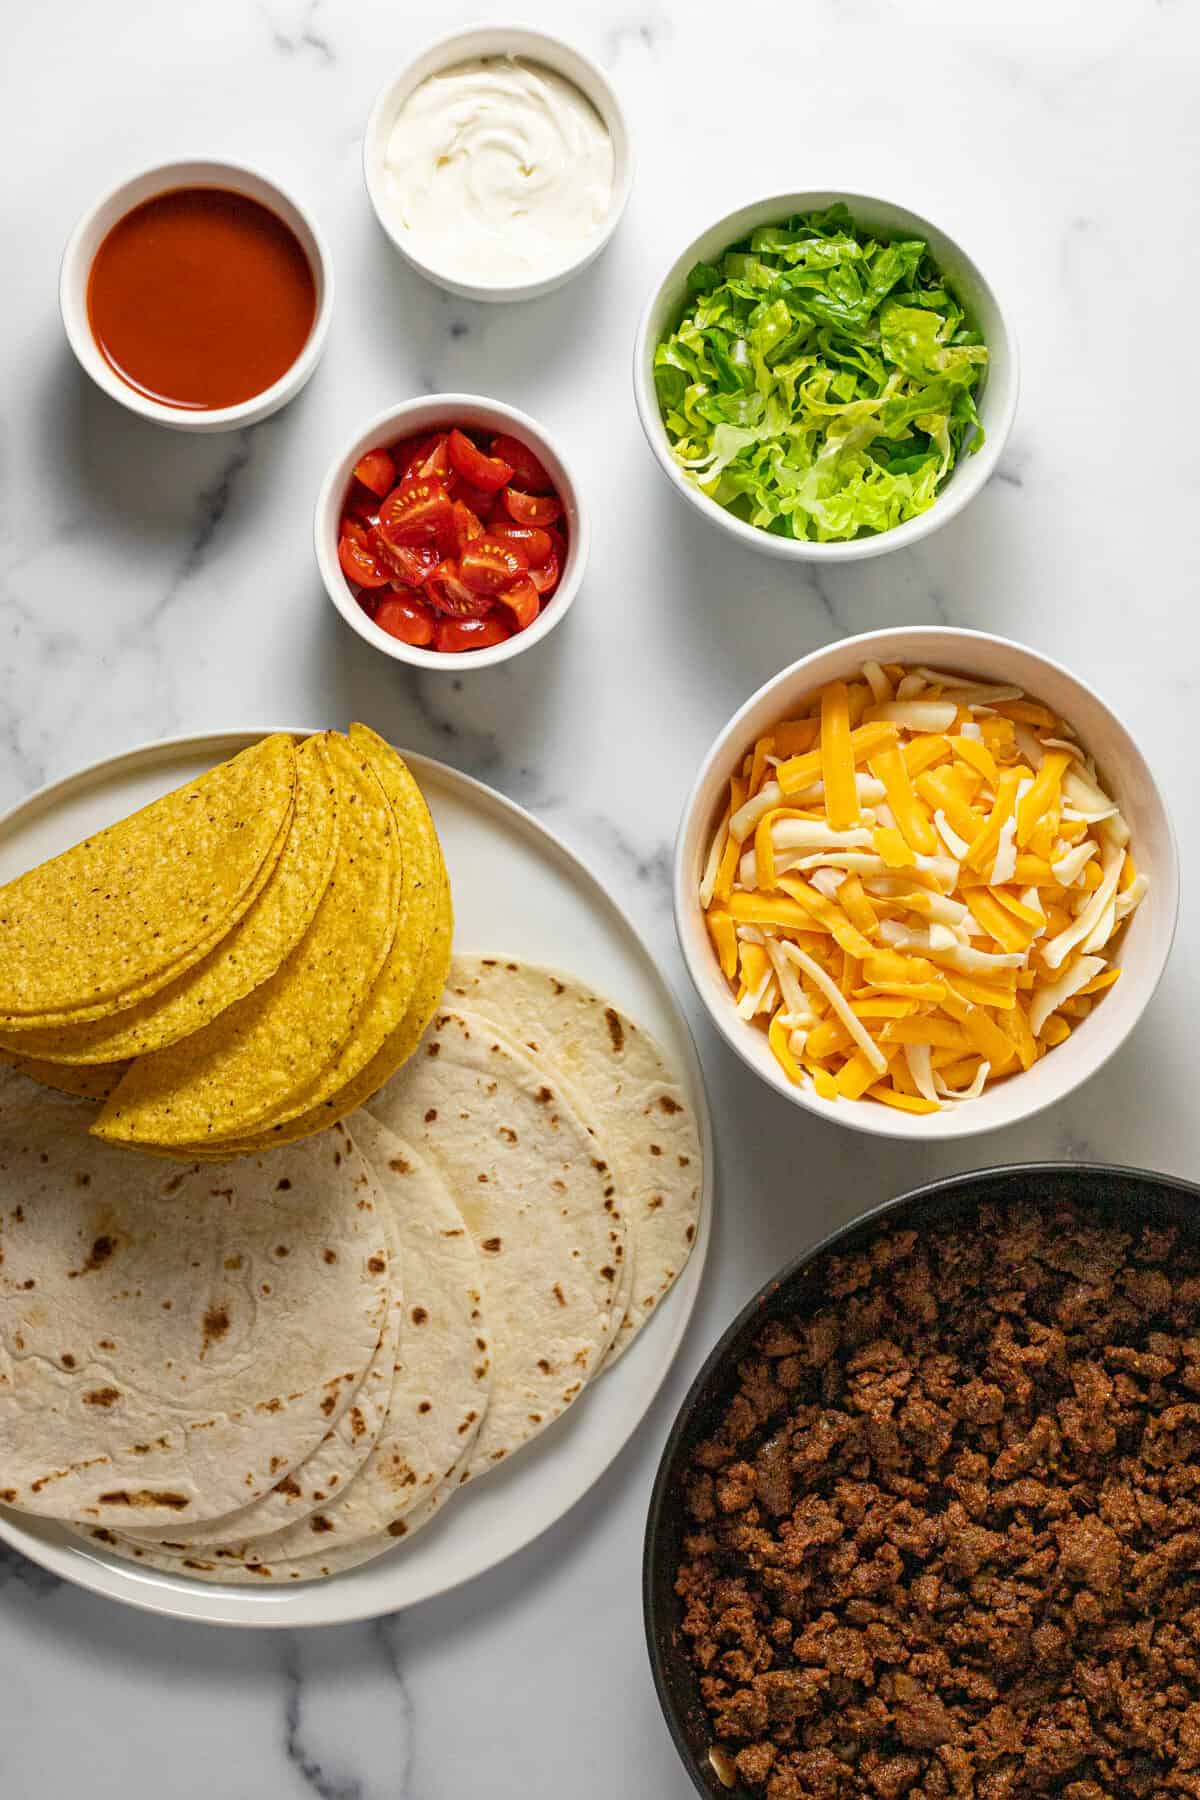 White marble counter top with bowls of ingredients to make cheesy gordita crunch tacos